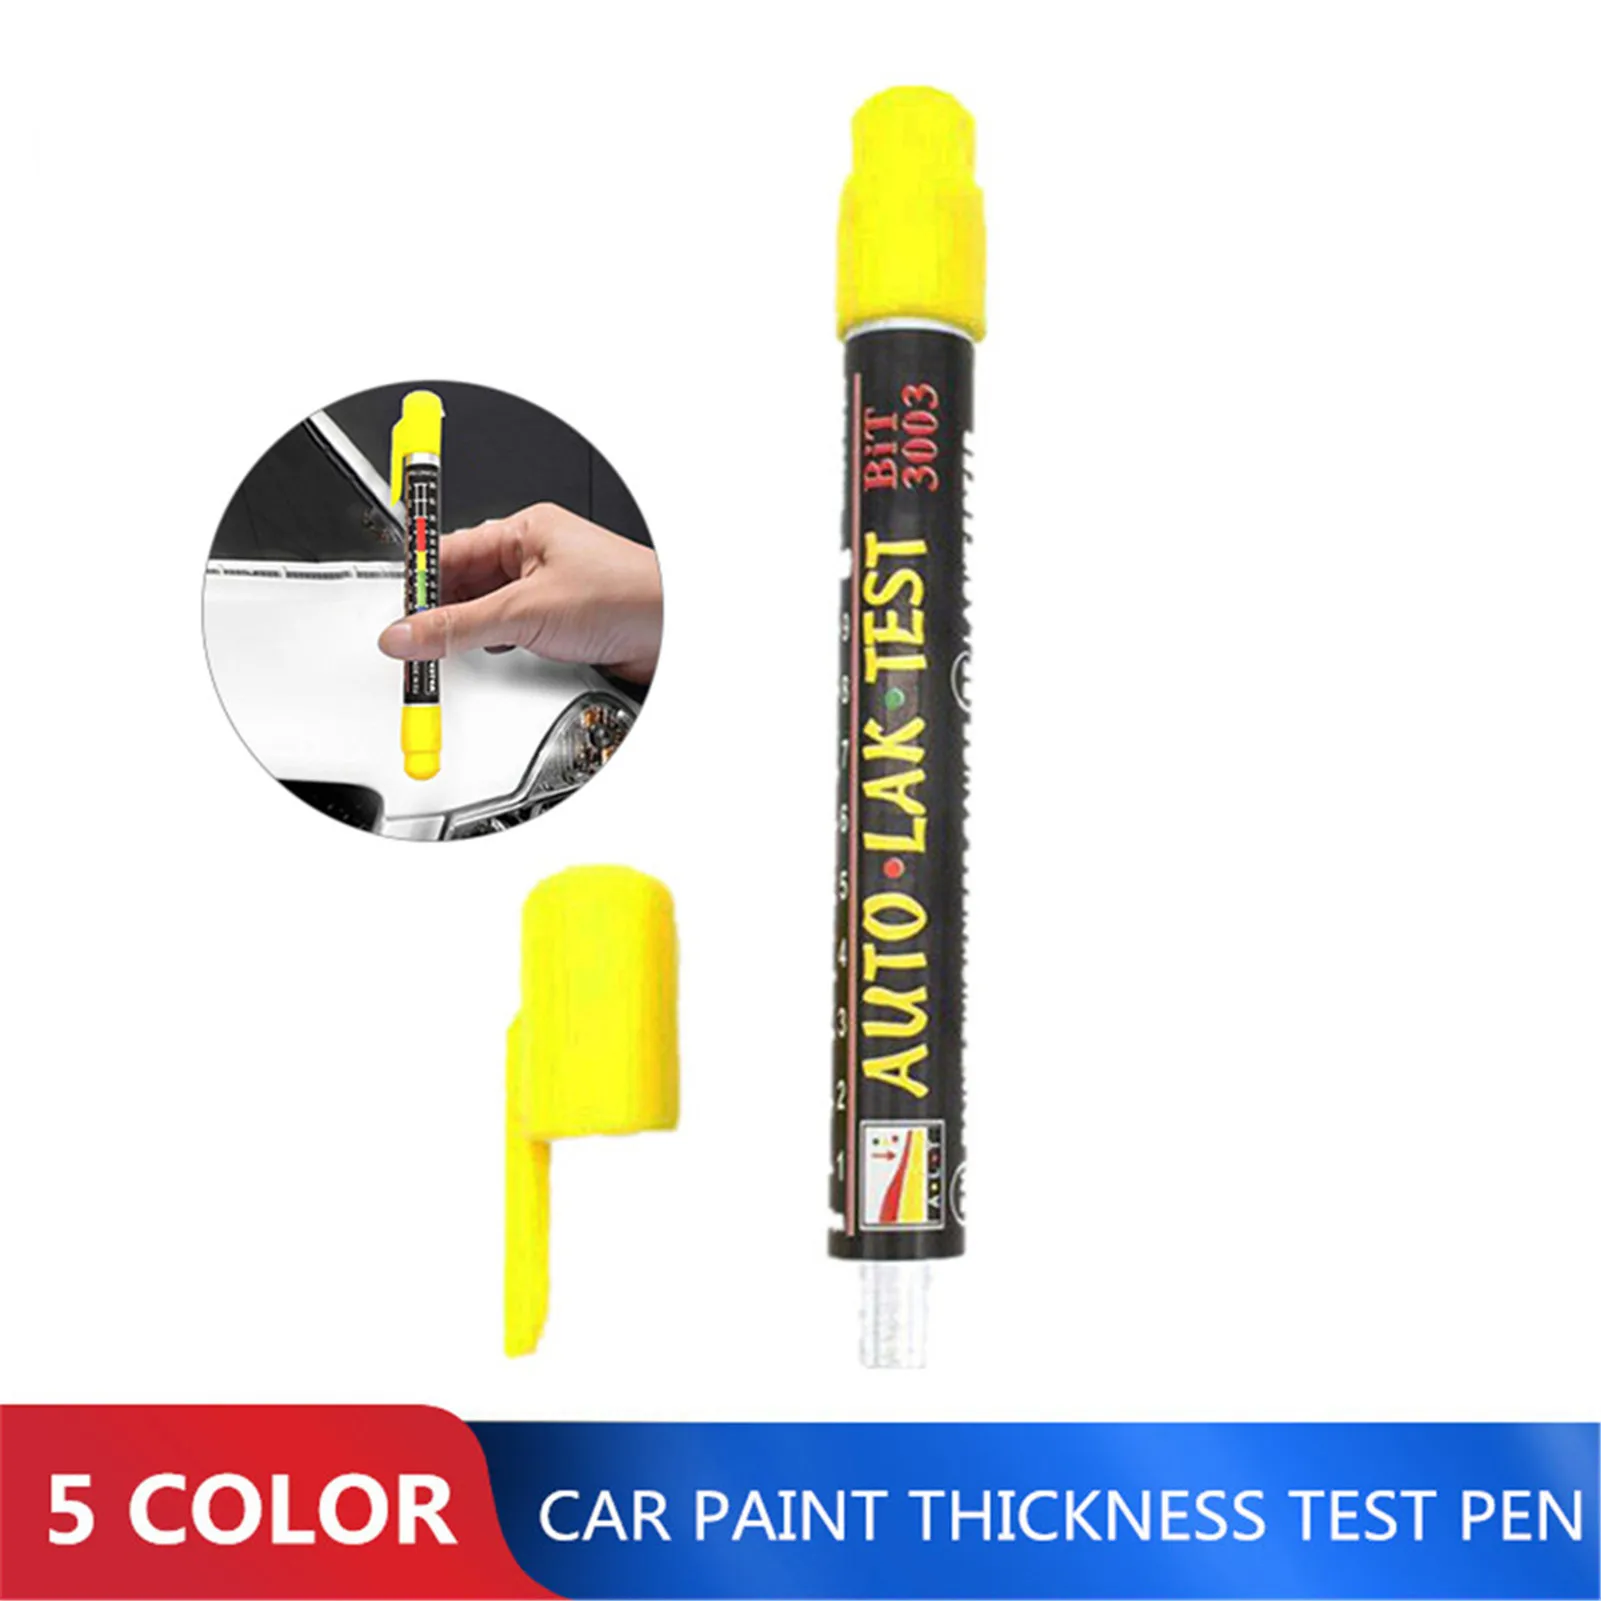 Paint Thickness Meter Coating Film Auto Measuring Water Resistant Car Crash Check Color Scale Lacquer Tester Gauge Magnetic Tip Pen Shape Portable Accurate Detector 